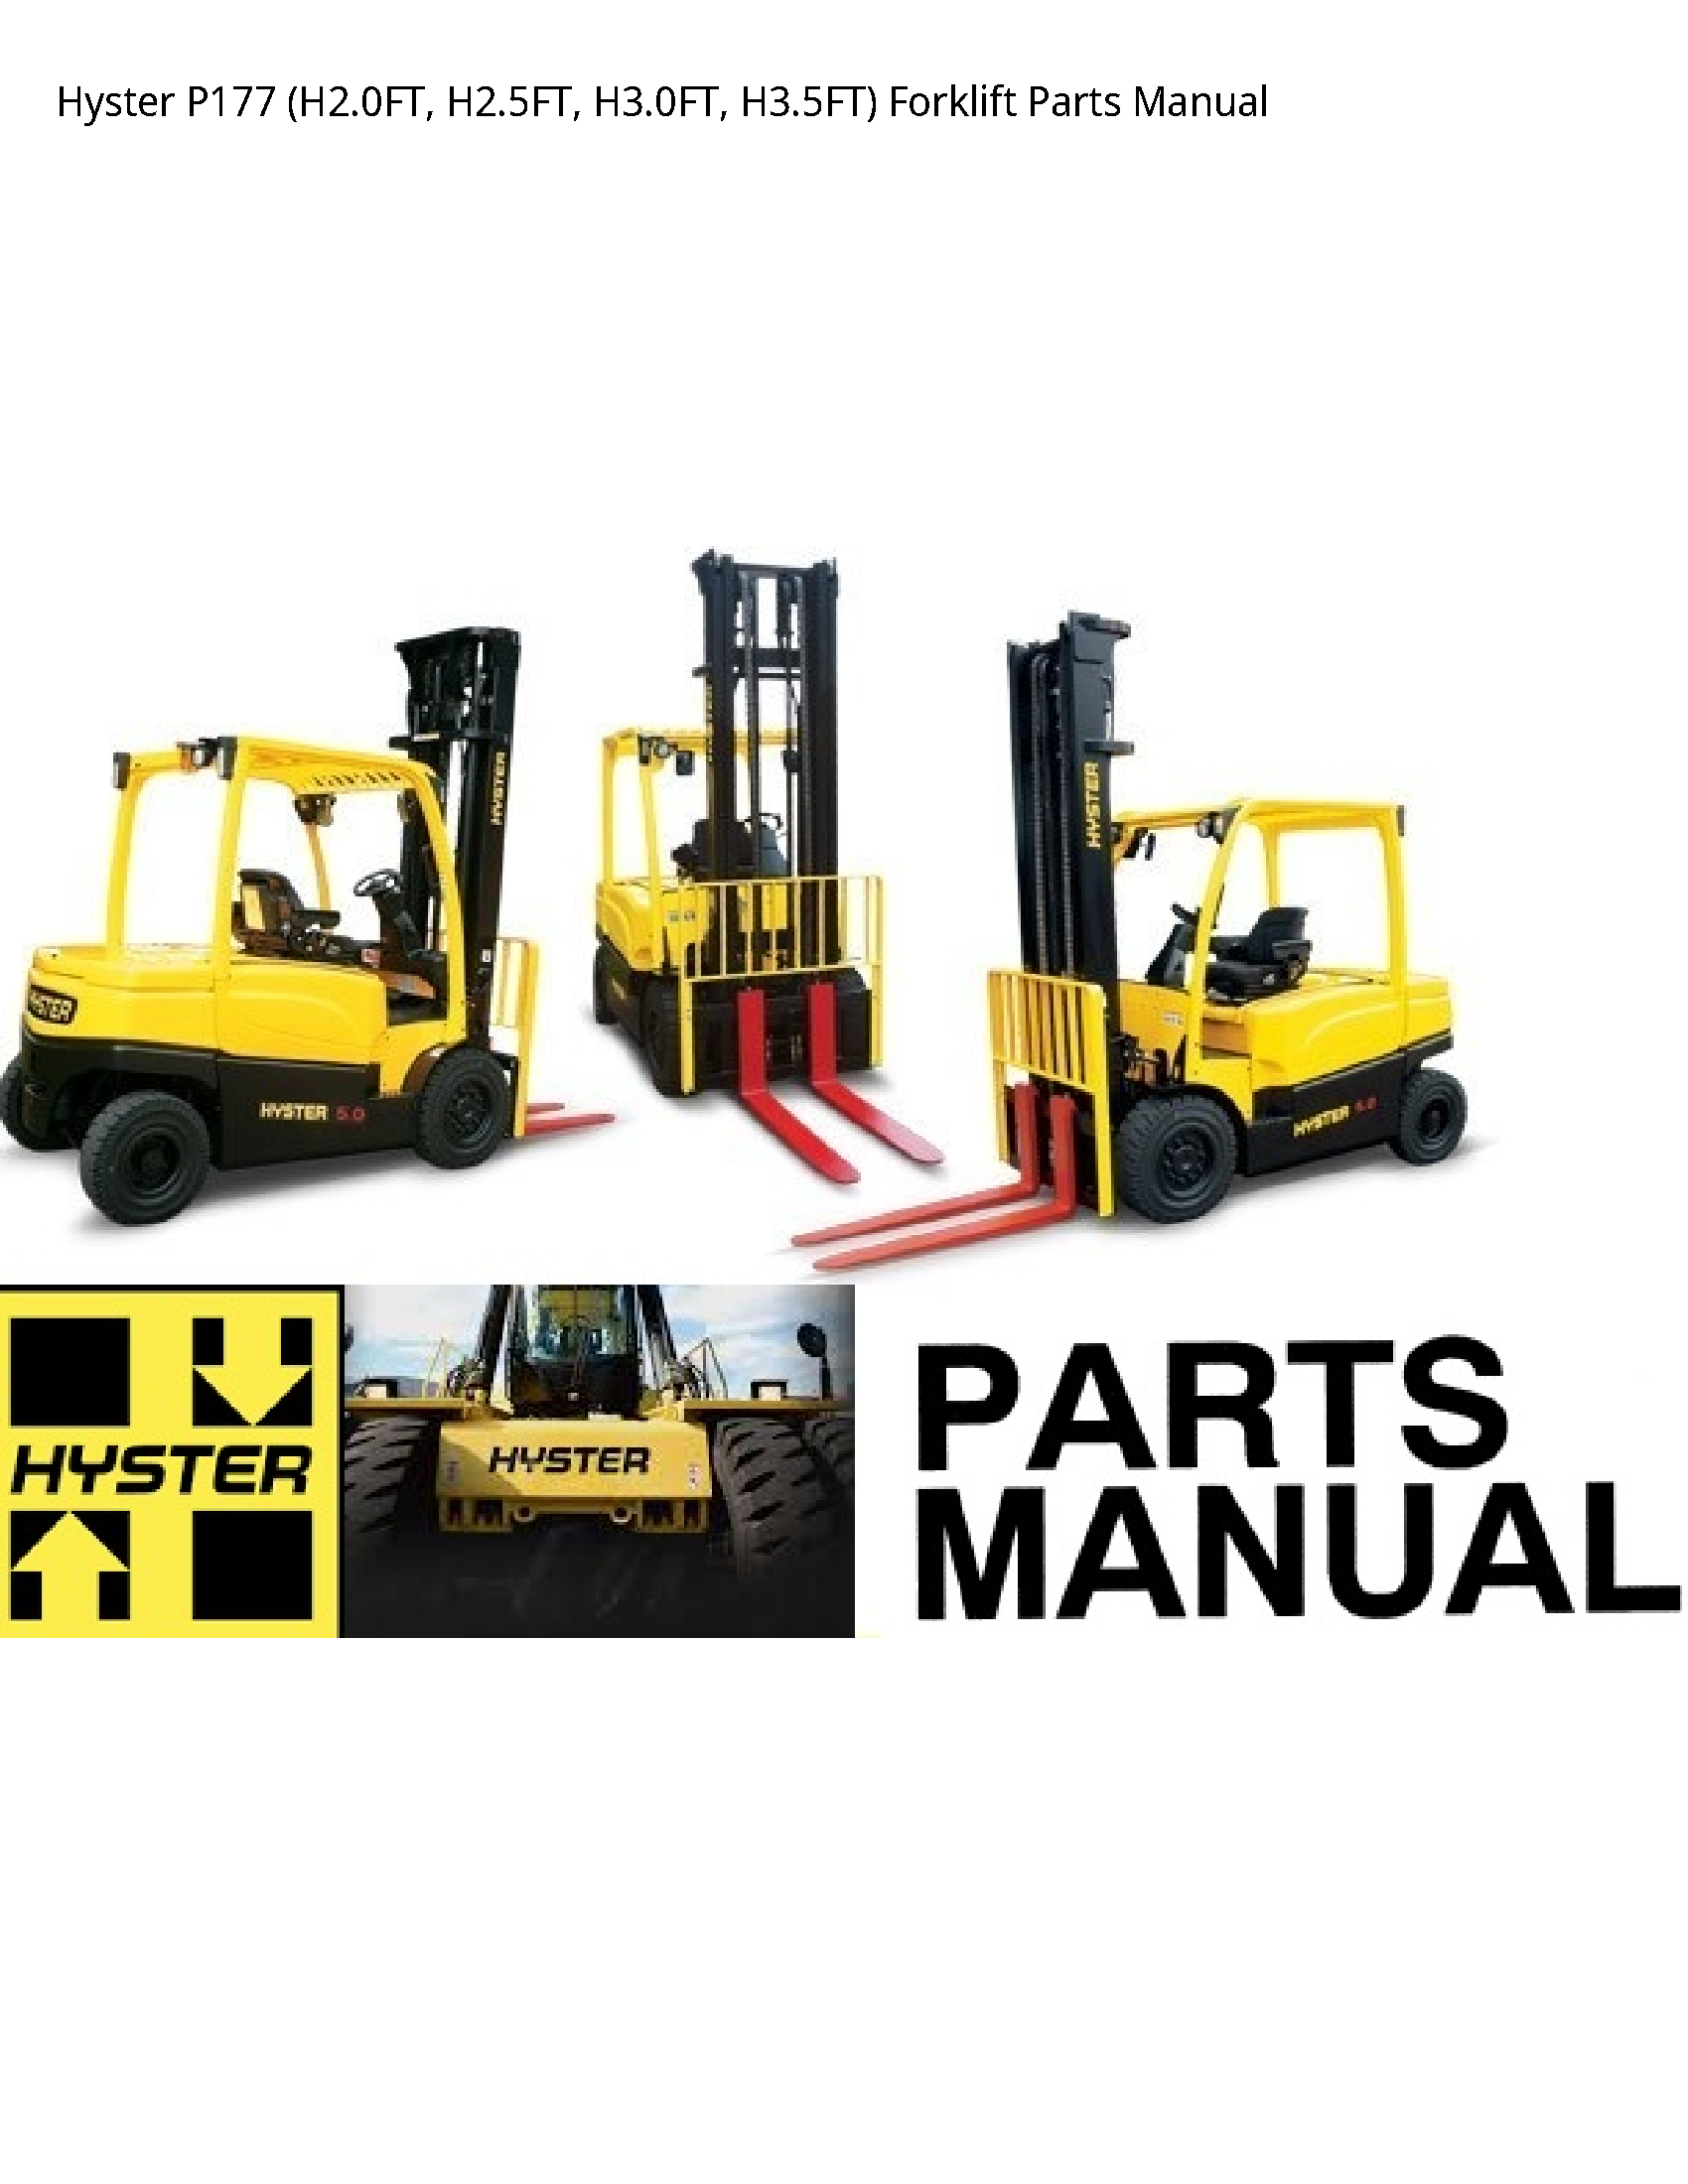 Hyster P177 Forklift Parts manual